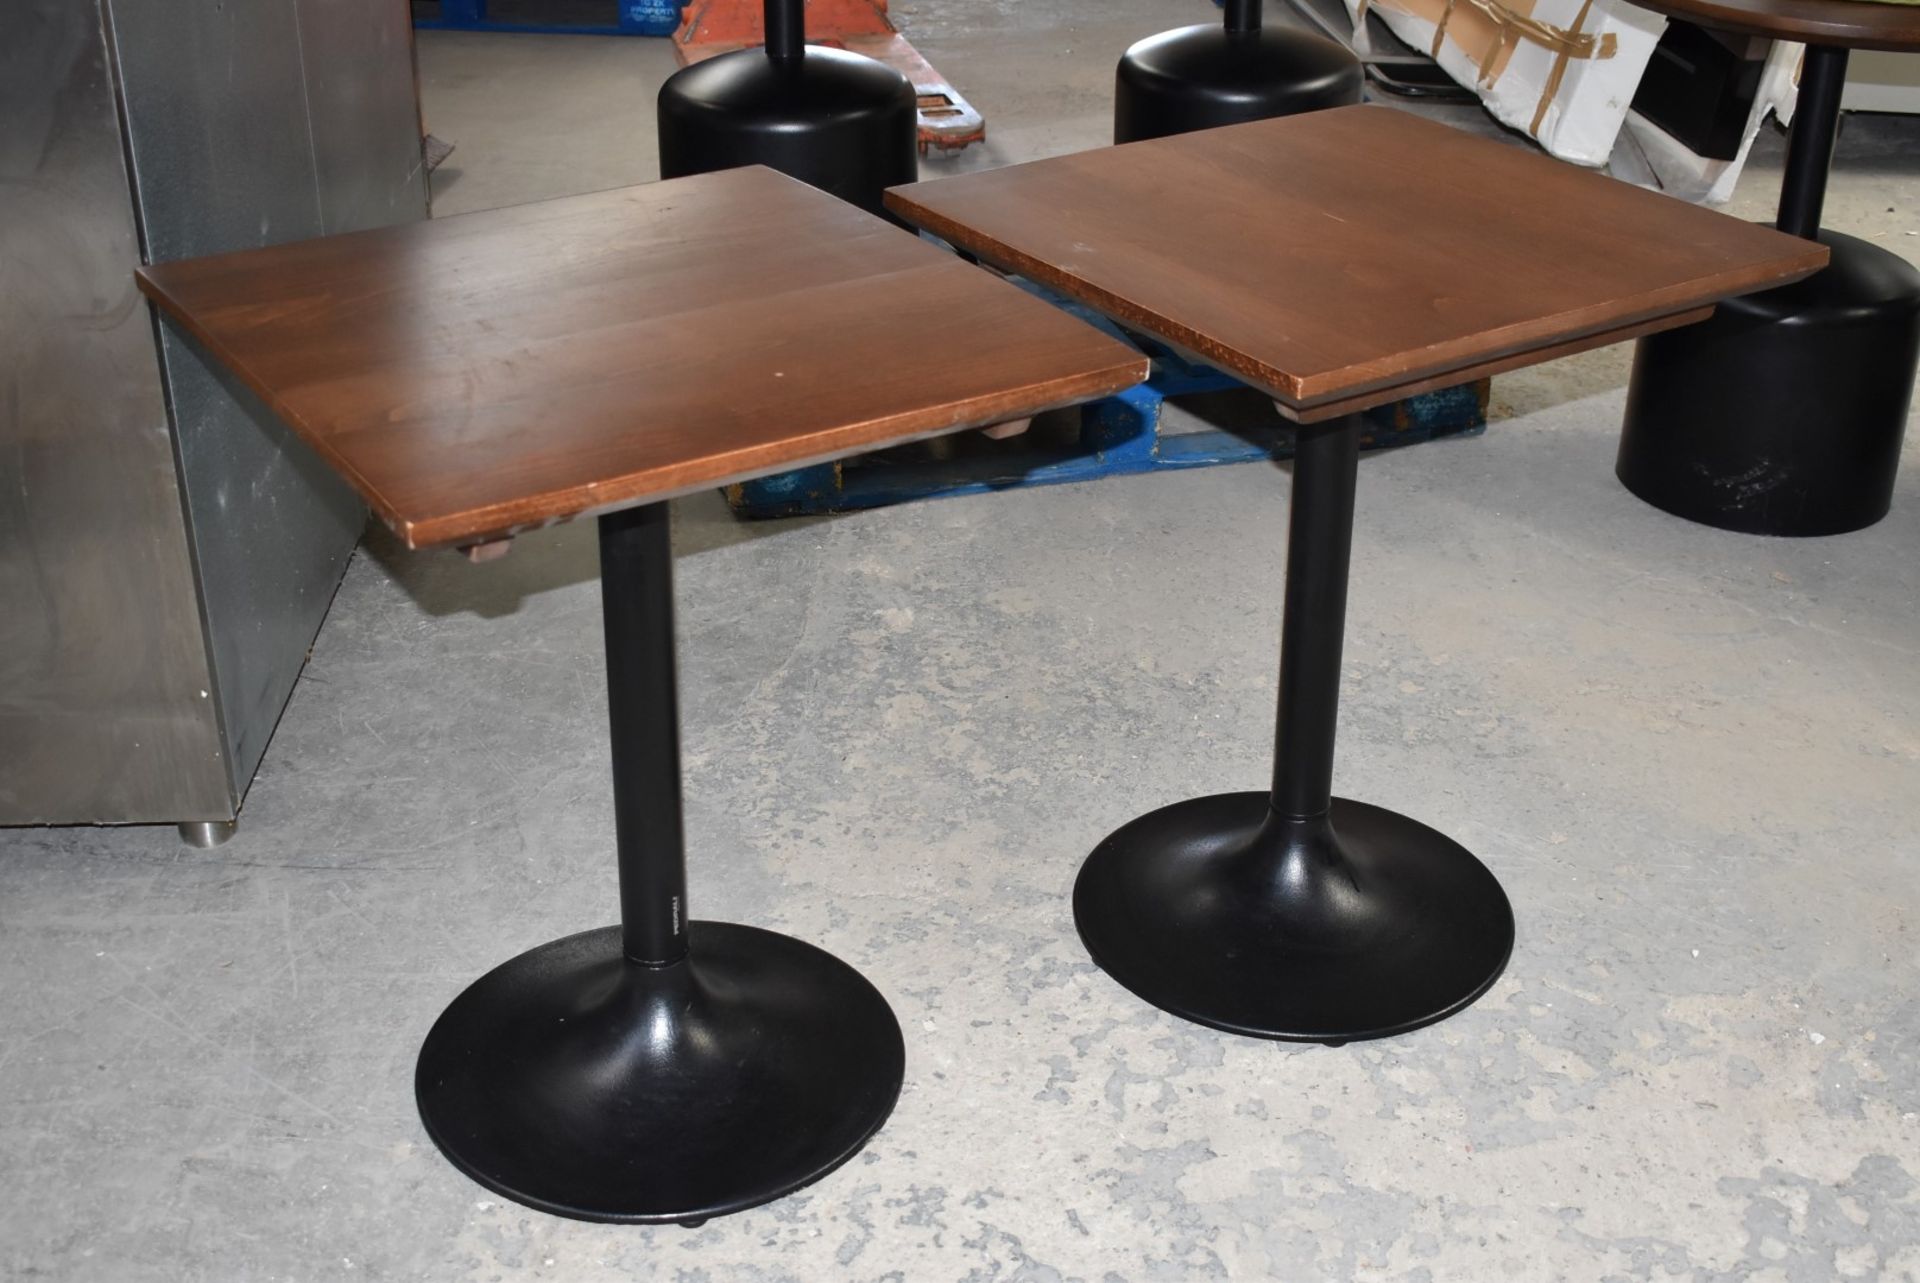 14 x Commercial Restaurant Tables Features Large Black Pedestals and Dark Stained Wooden Tops - Image 22 of 23